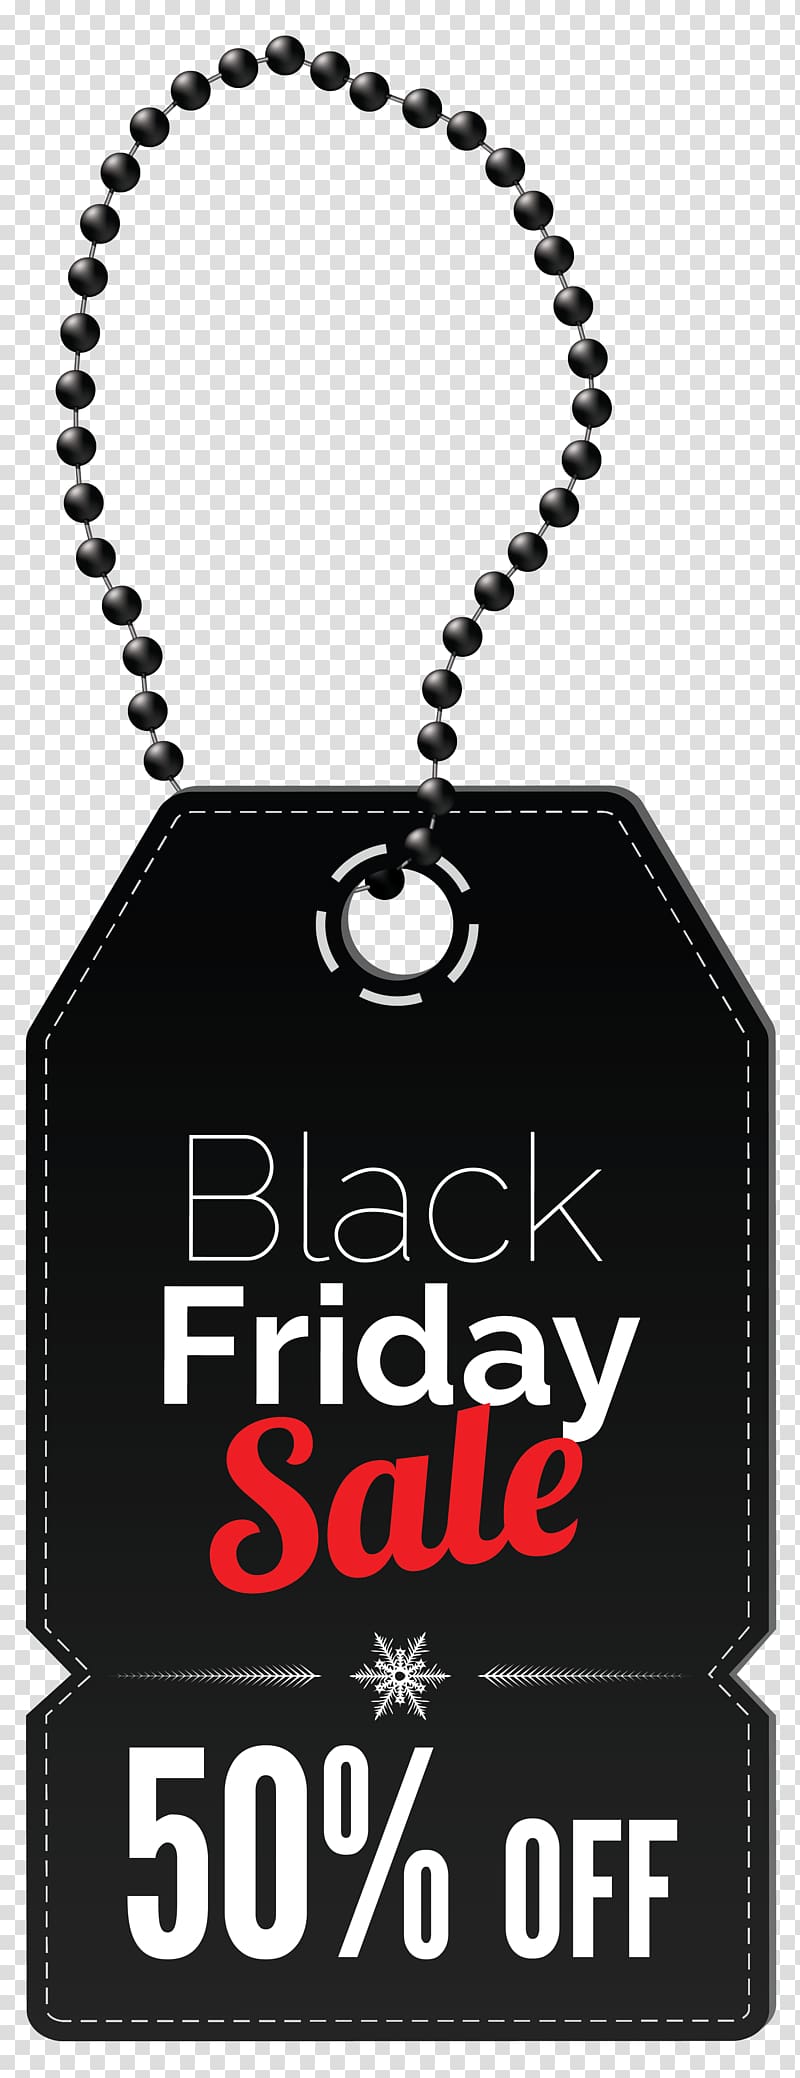 black friday sale 50 percent off tag, Black Friday Sales , Black Friday 50% OFF Tag transparent background PNG clipart